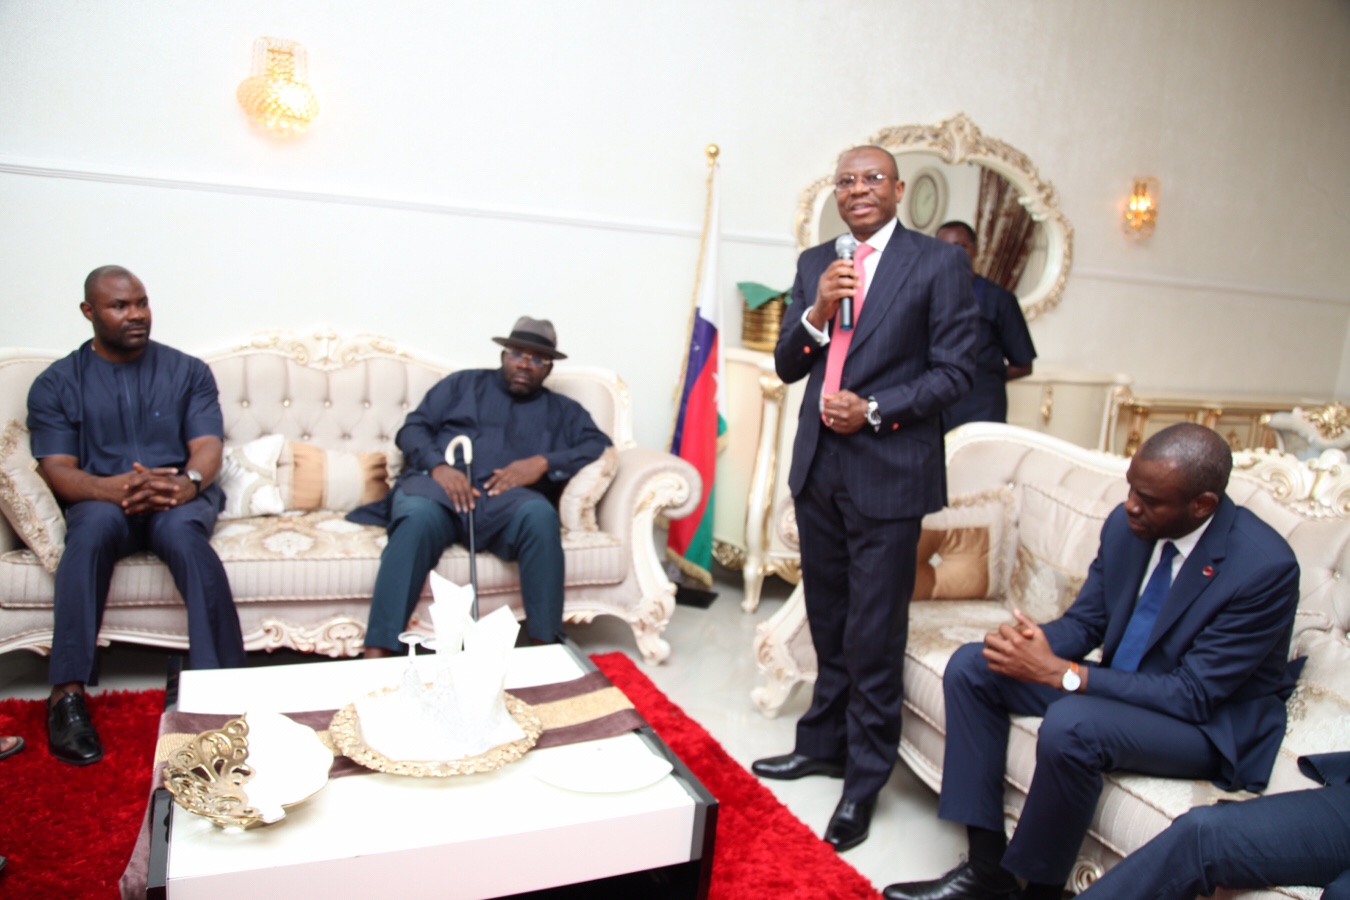 Immediate past MD/CEO of Sterling Bank, Mr. Yemi Adeola (2ndright) speaking during a condolence visit to the Governor of Bayelsa , Hon. Seriake Dickson (2nd left) at Toru-Orua in Sagbama Local Government Area of the State, while the MD/CEO of the Bank, Mr. Abubakar Suleiman (right) and Mr. Akpos Dickson (left) look on.